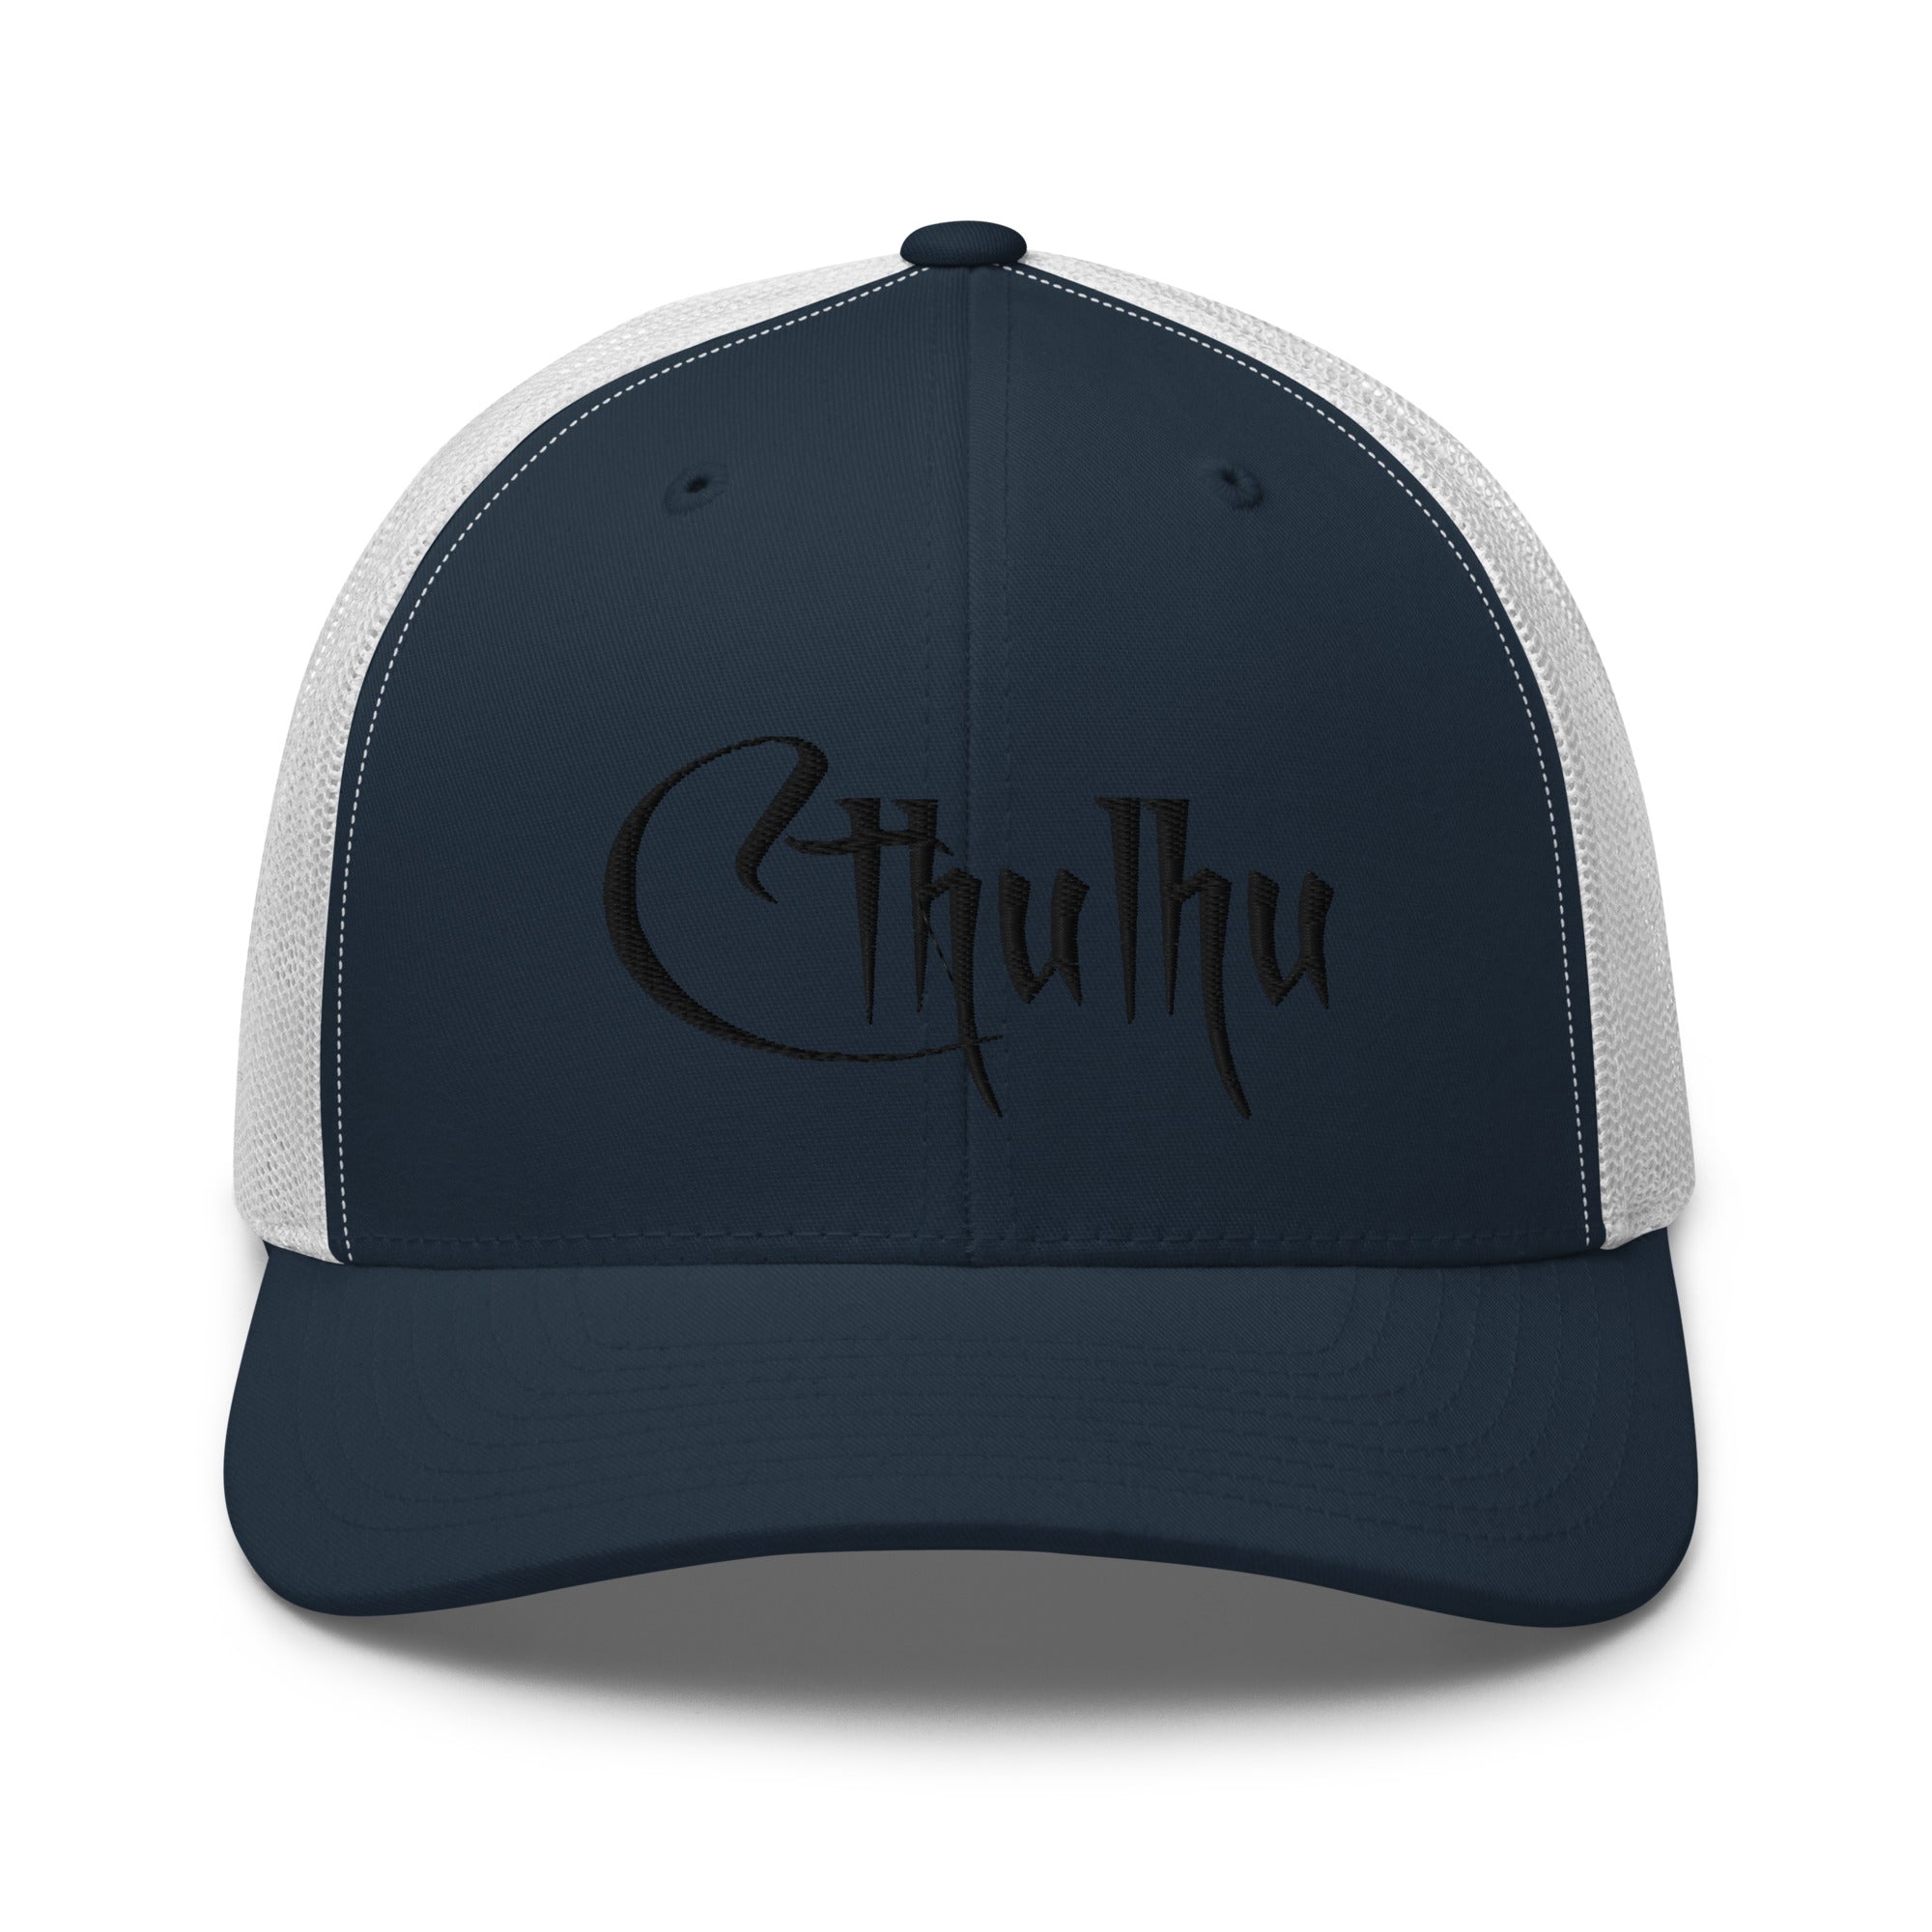 Black Call of Cthulhu Great Old Ones Embroidered Trucker Cap Snapback Hat